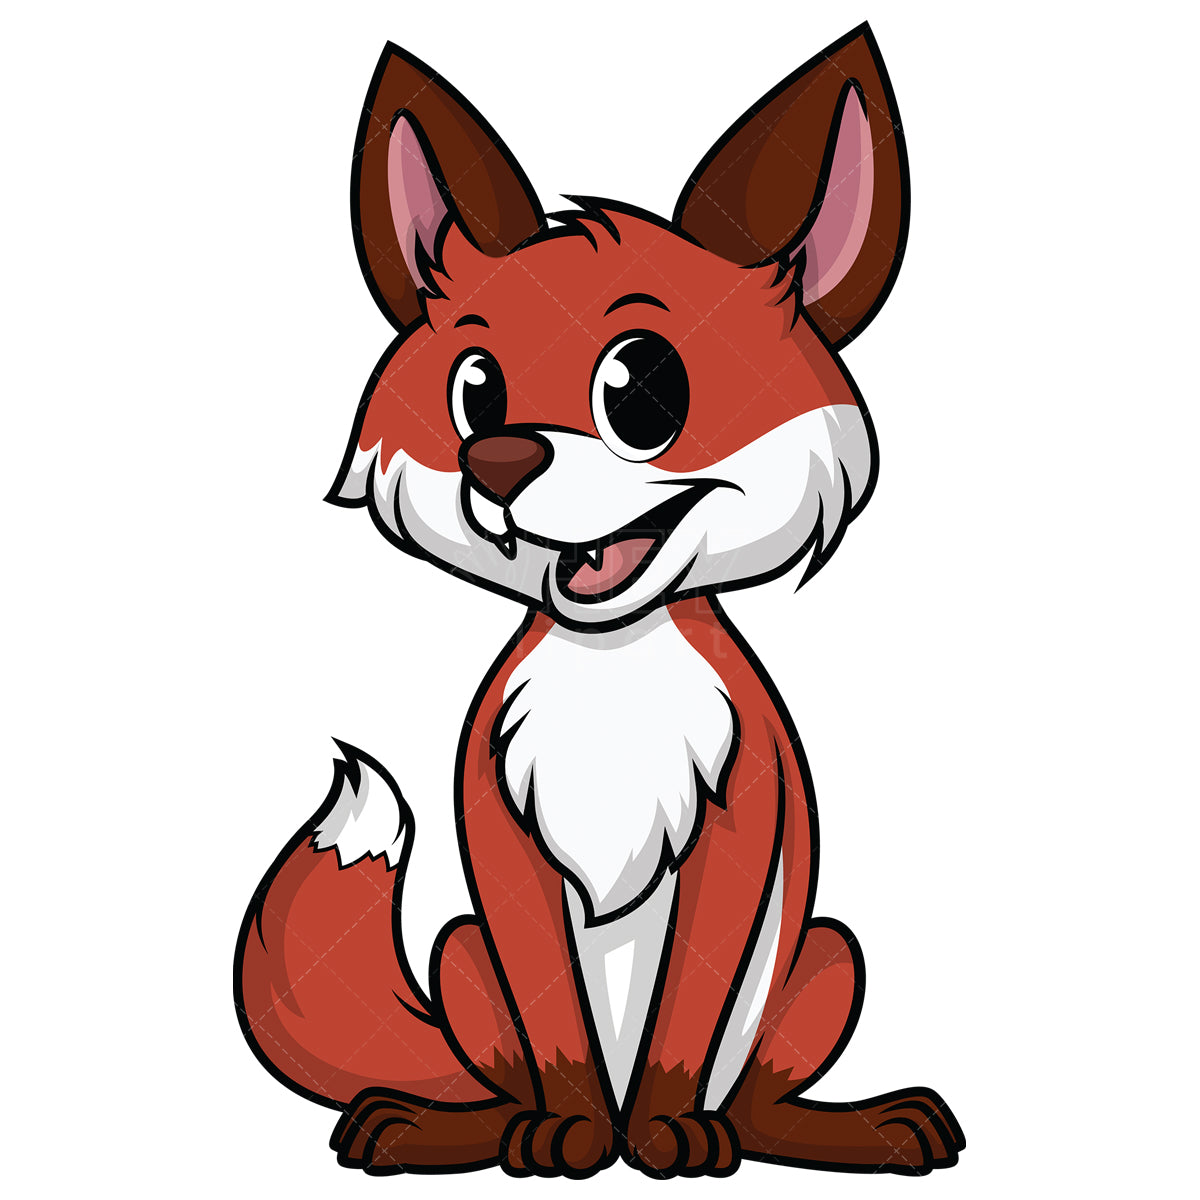 Royalty-free stock vector illustration of a fox sitting down.